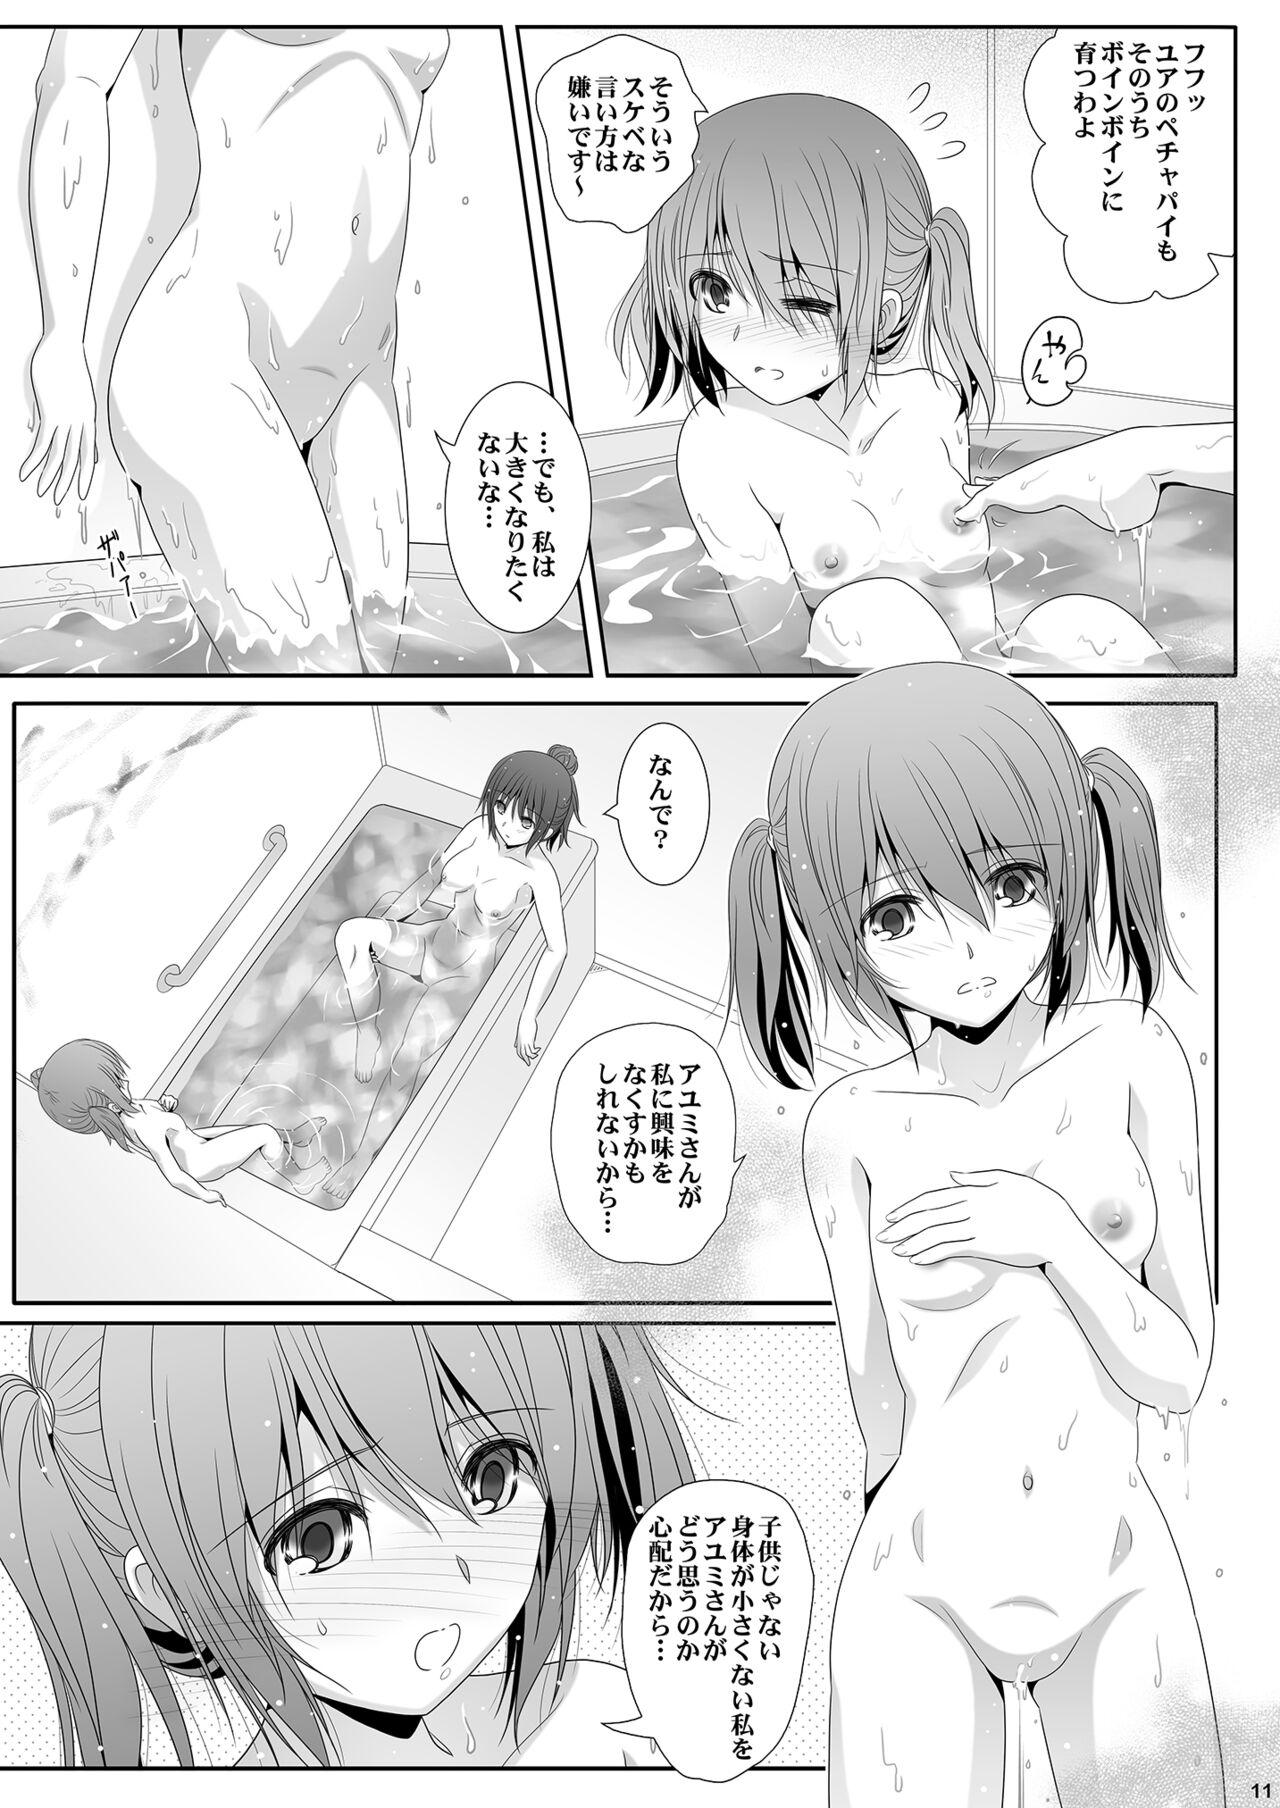 Cutie Toshi no Thirteen - Age Difference is 13 Years - Original Job - Page 11